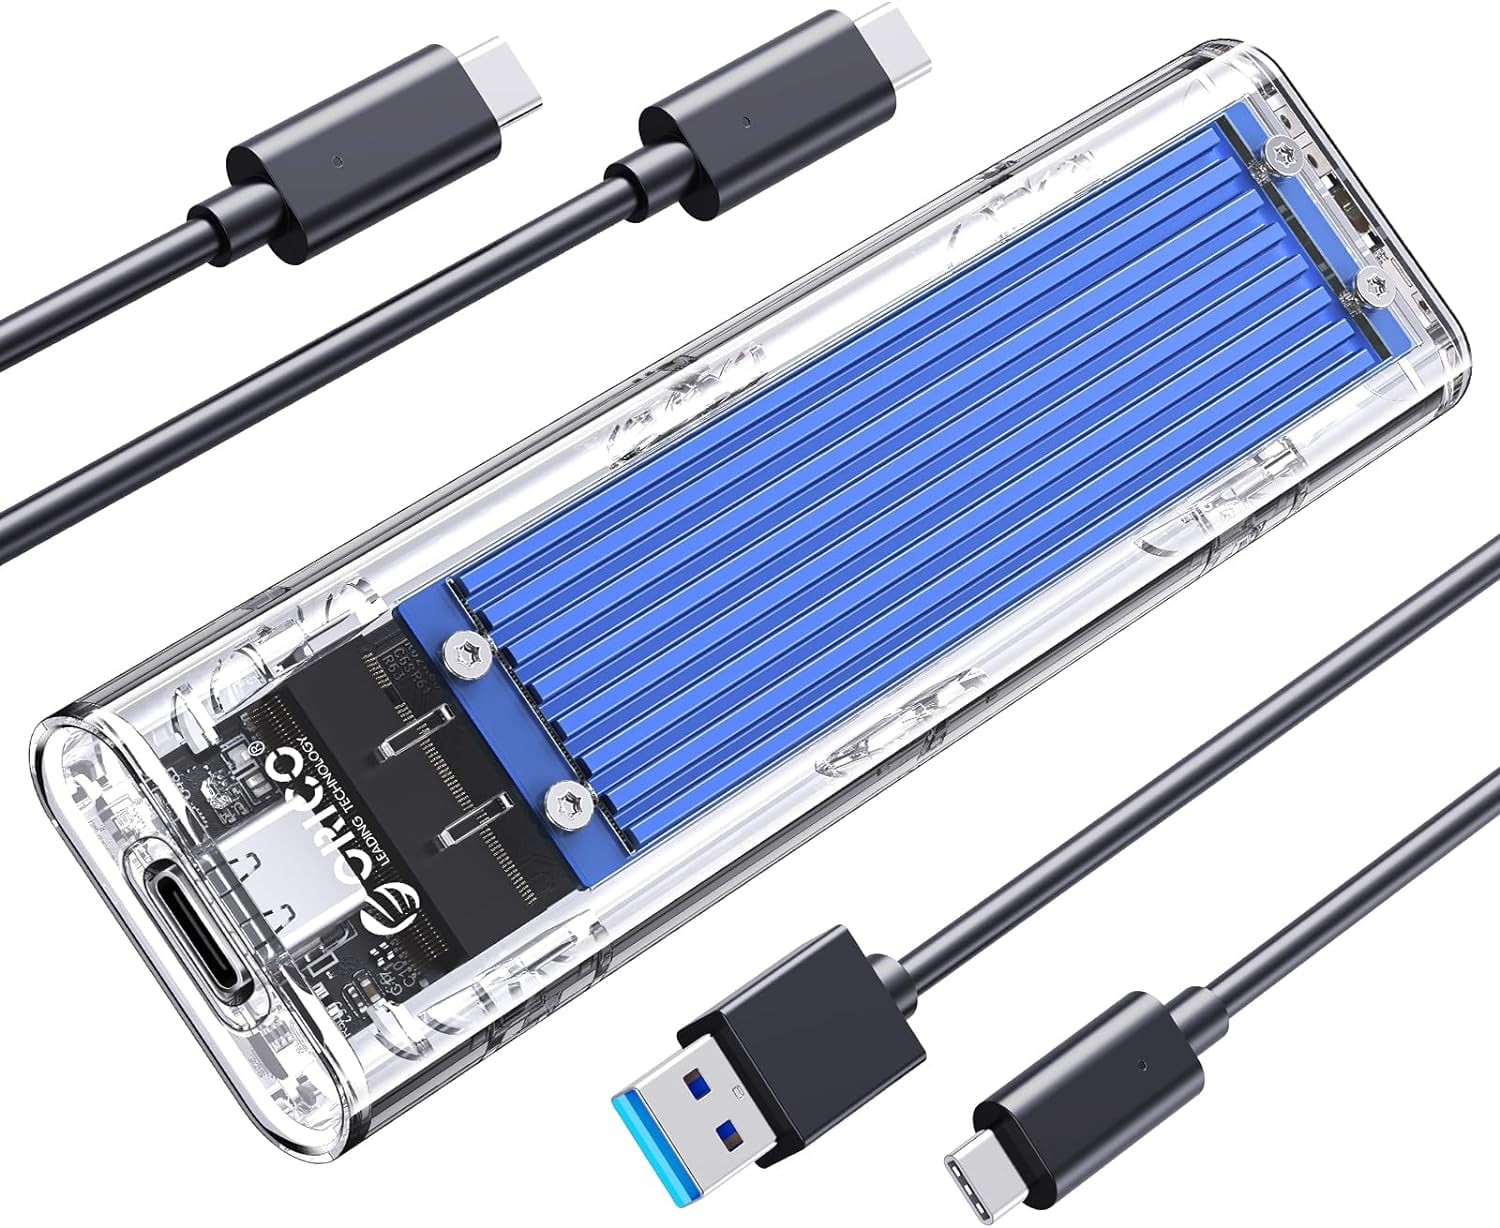  M.2 NVMe SATA SSD Enclosure with 6-in-1 Hybrid Type-C